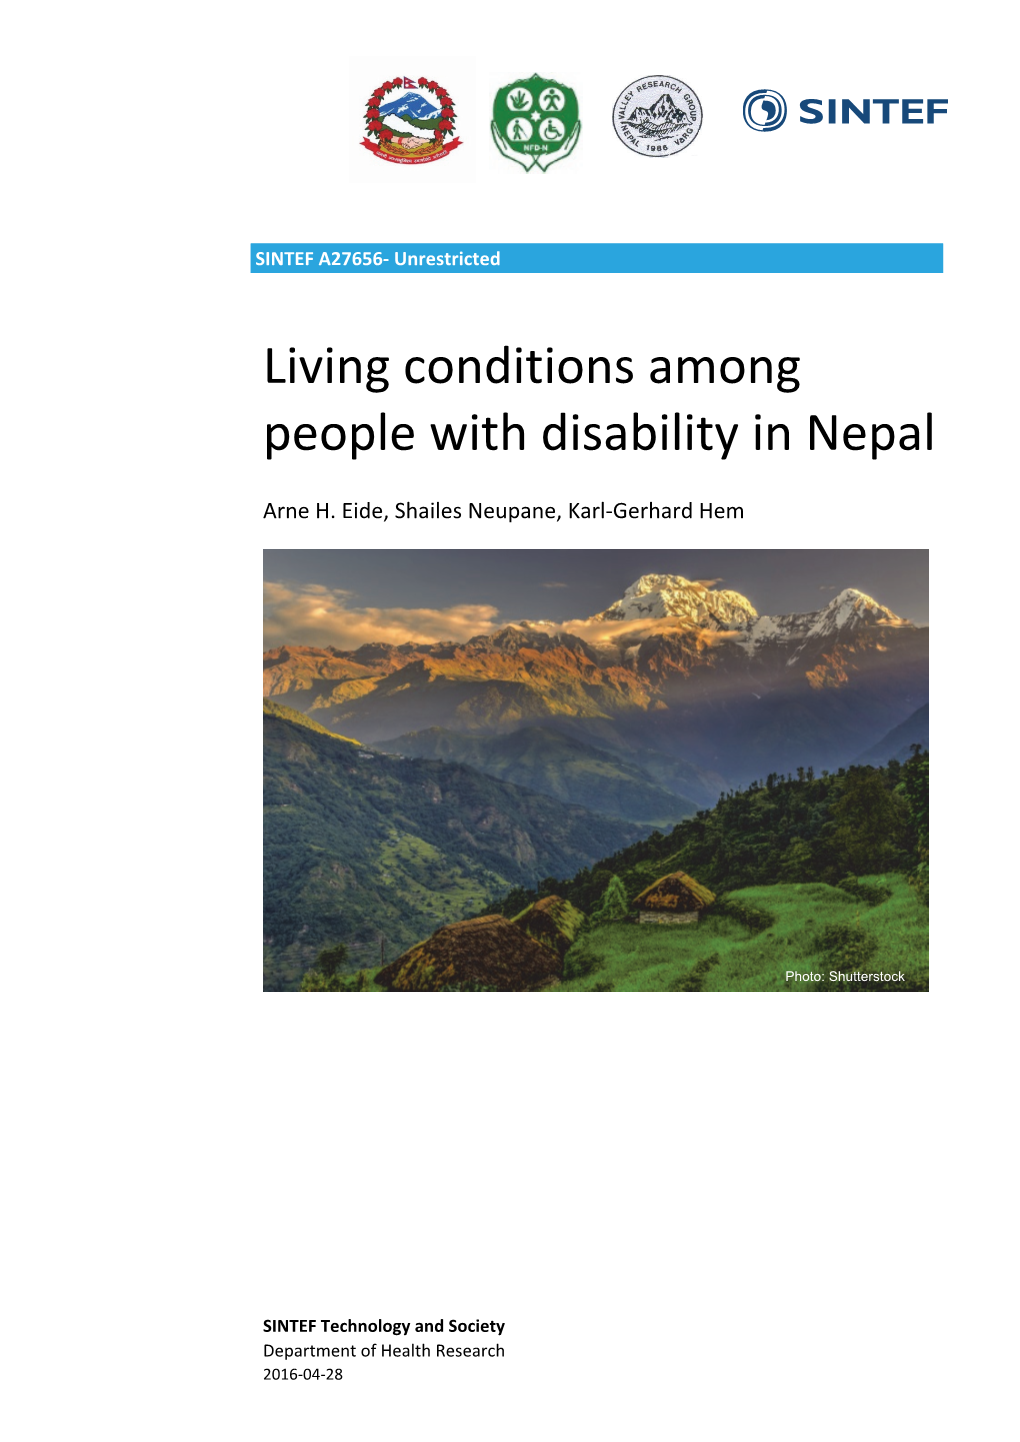 Living Conditions Among People with Disability in Nepal